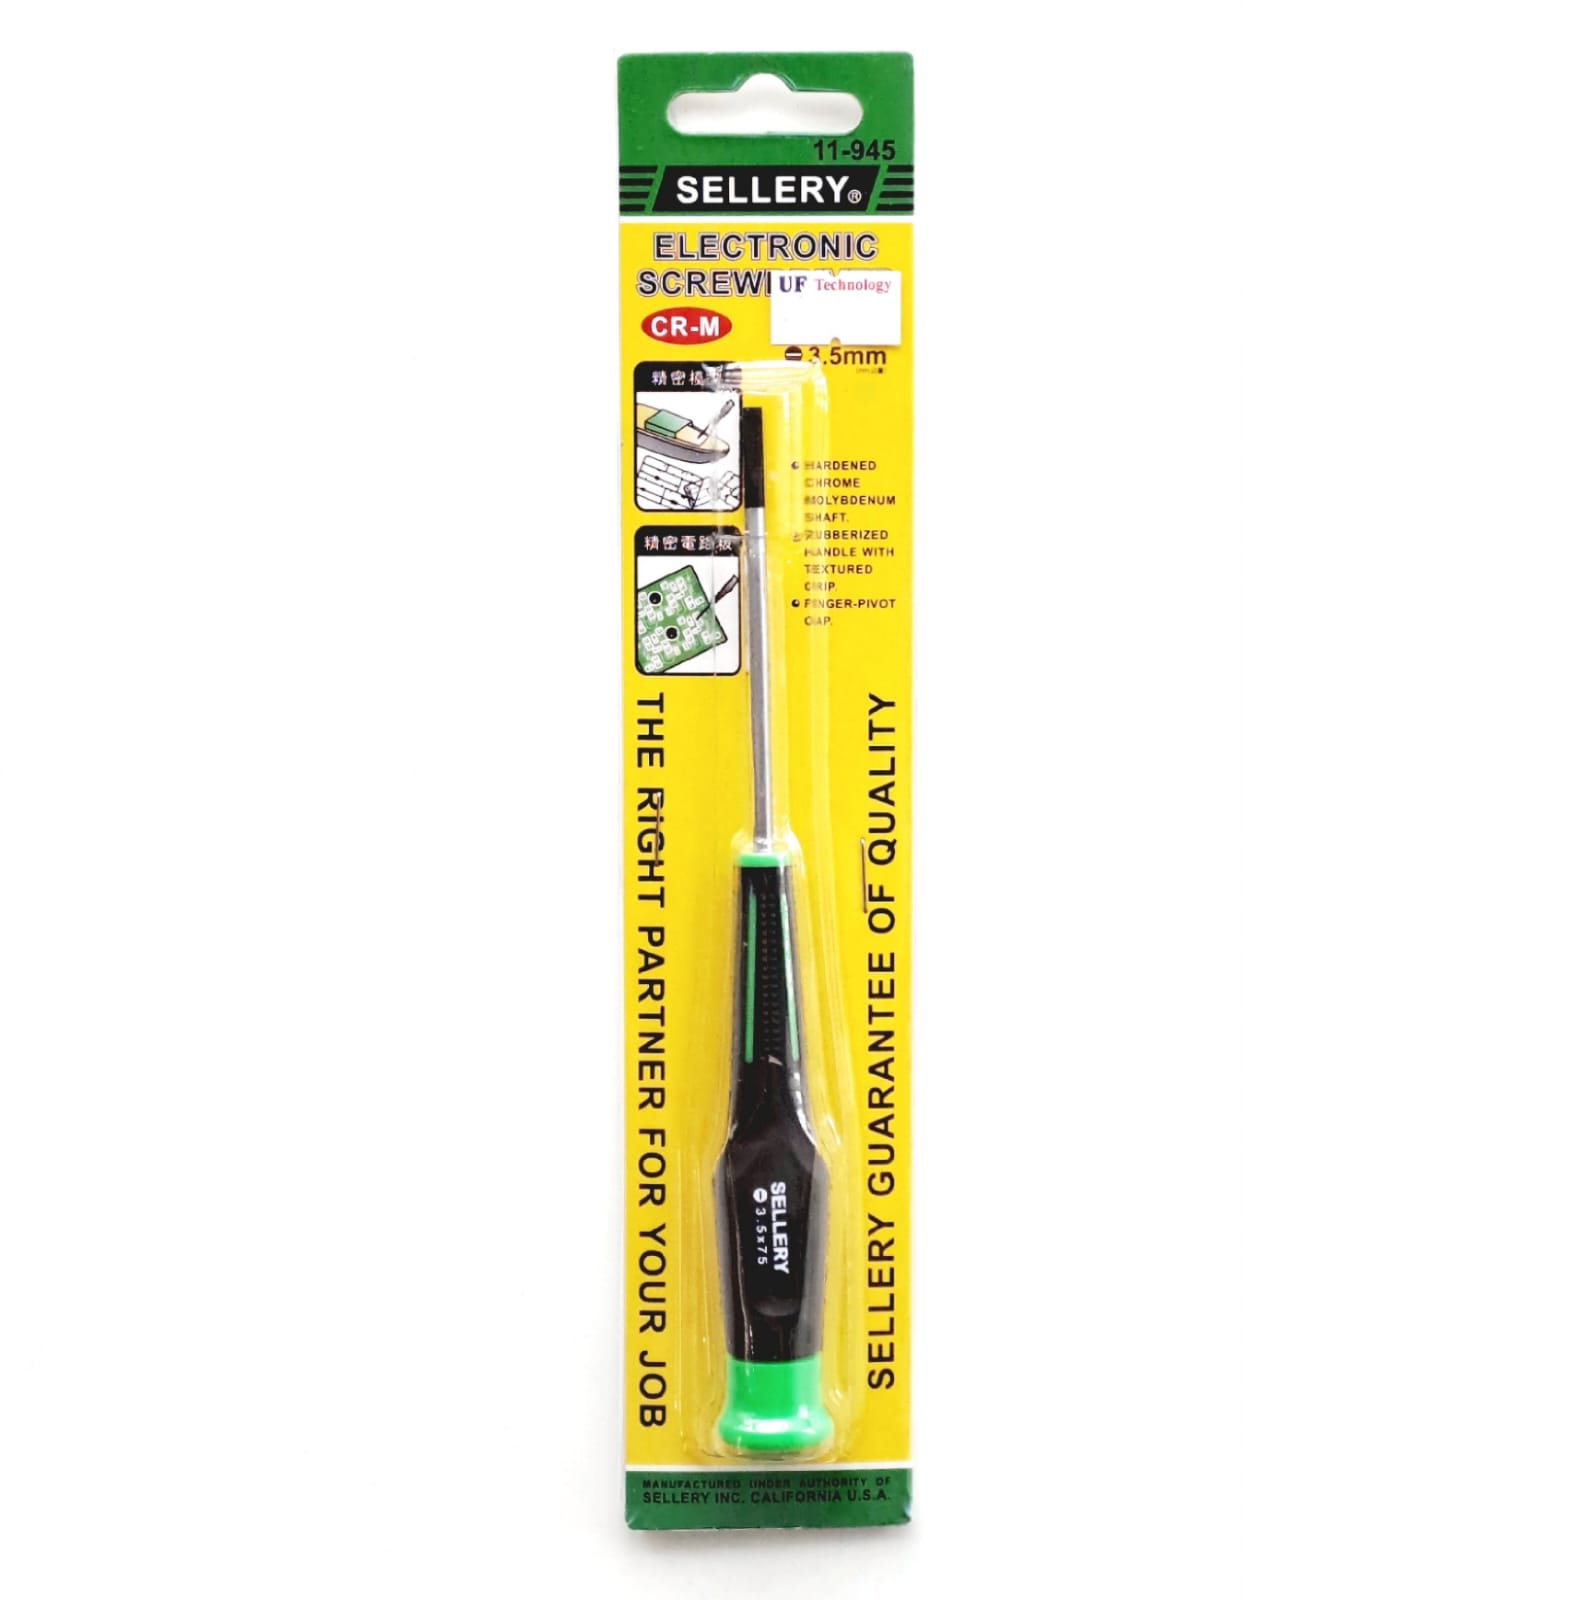 Sellery 11-945 Precision Screwdriver, Slotted 3.5mm